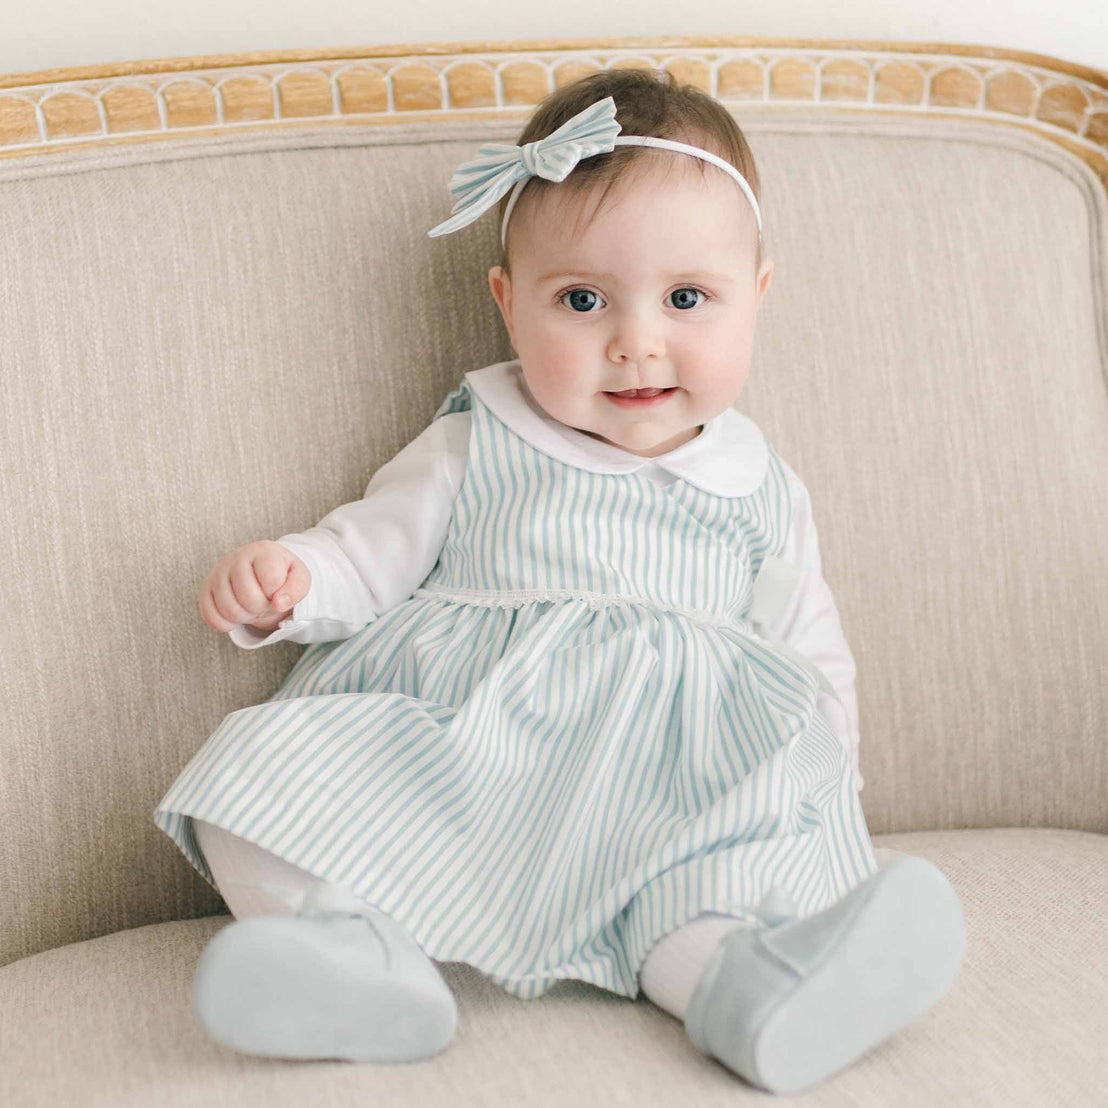 A baby in the blue Thea Wrap Dress and matching Thea Bow Headband sits on a beige sofa, looking curiously at the camera.